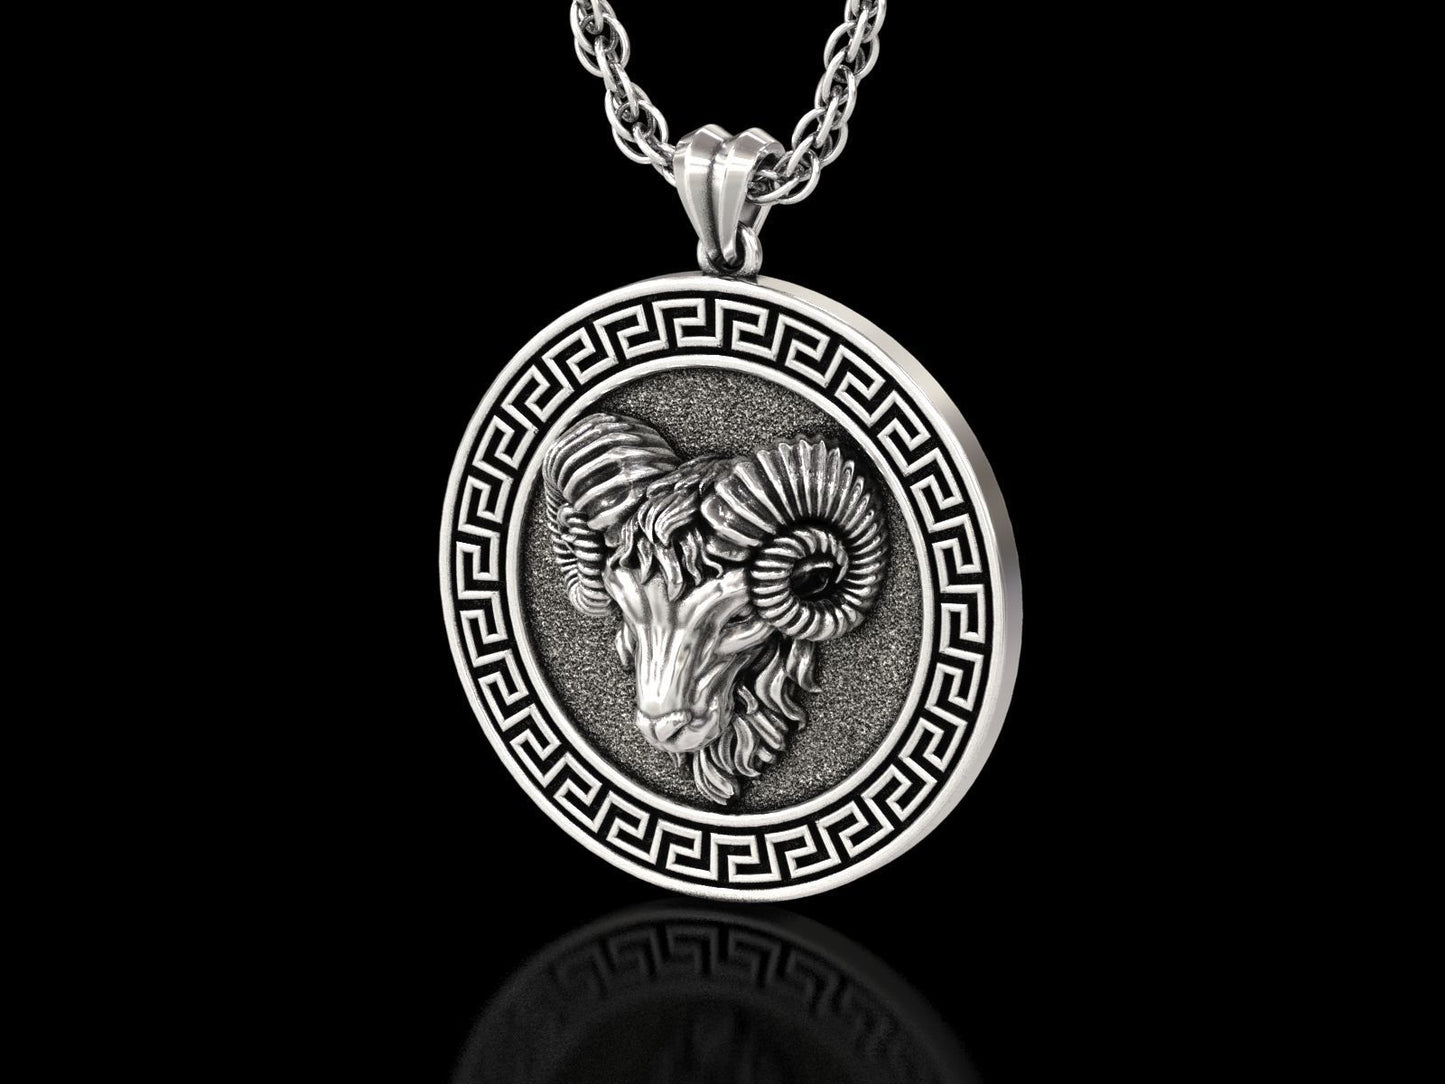 RARE PRINCE by CARAT SUTRA | Unique Designed Pendant for Aries Zodiac for Men | 925 Sterling Silver Oxidized Pendant | Men's Jewelry | With Certificate of Authenticity and 925 Hallmark